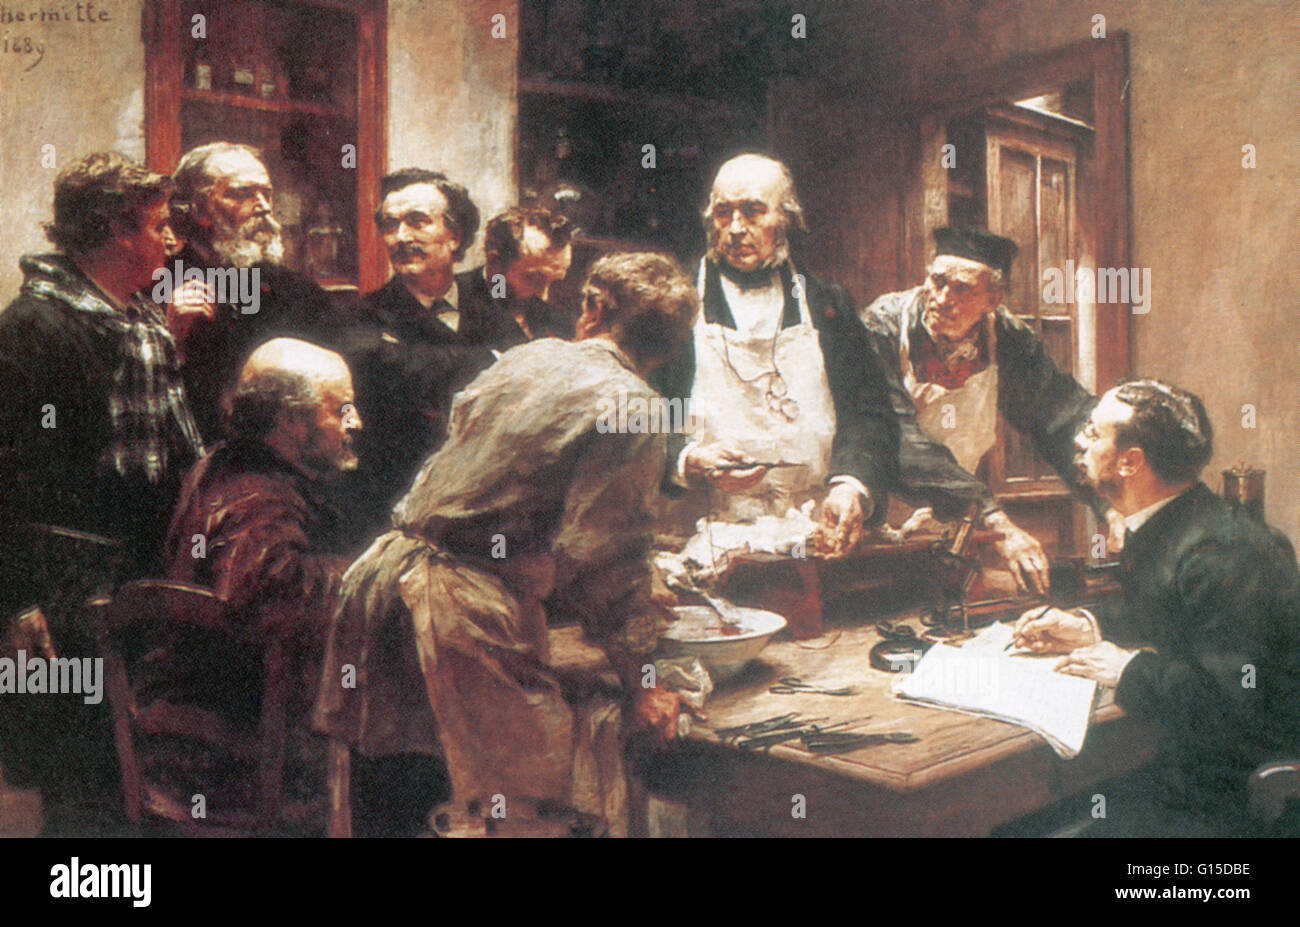 Claude Bernard demonstrates an experiment for the chemist Henri Sainte-Claire Deville (seated at left), in a prize winning painting by Leon Lhermitte (1889). Claude Bernard (1813-1878) was a French physiologist. Milieu interieur is the key process with wh Stock Photo